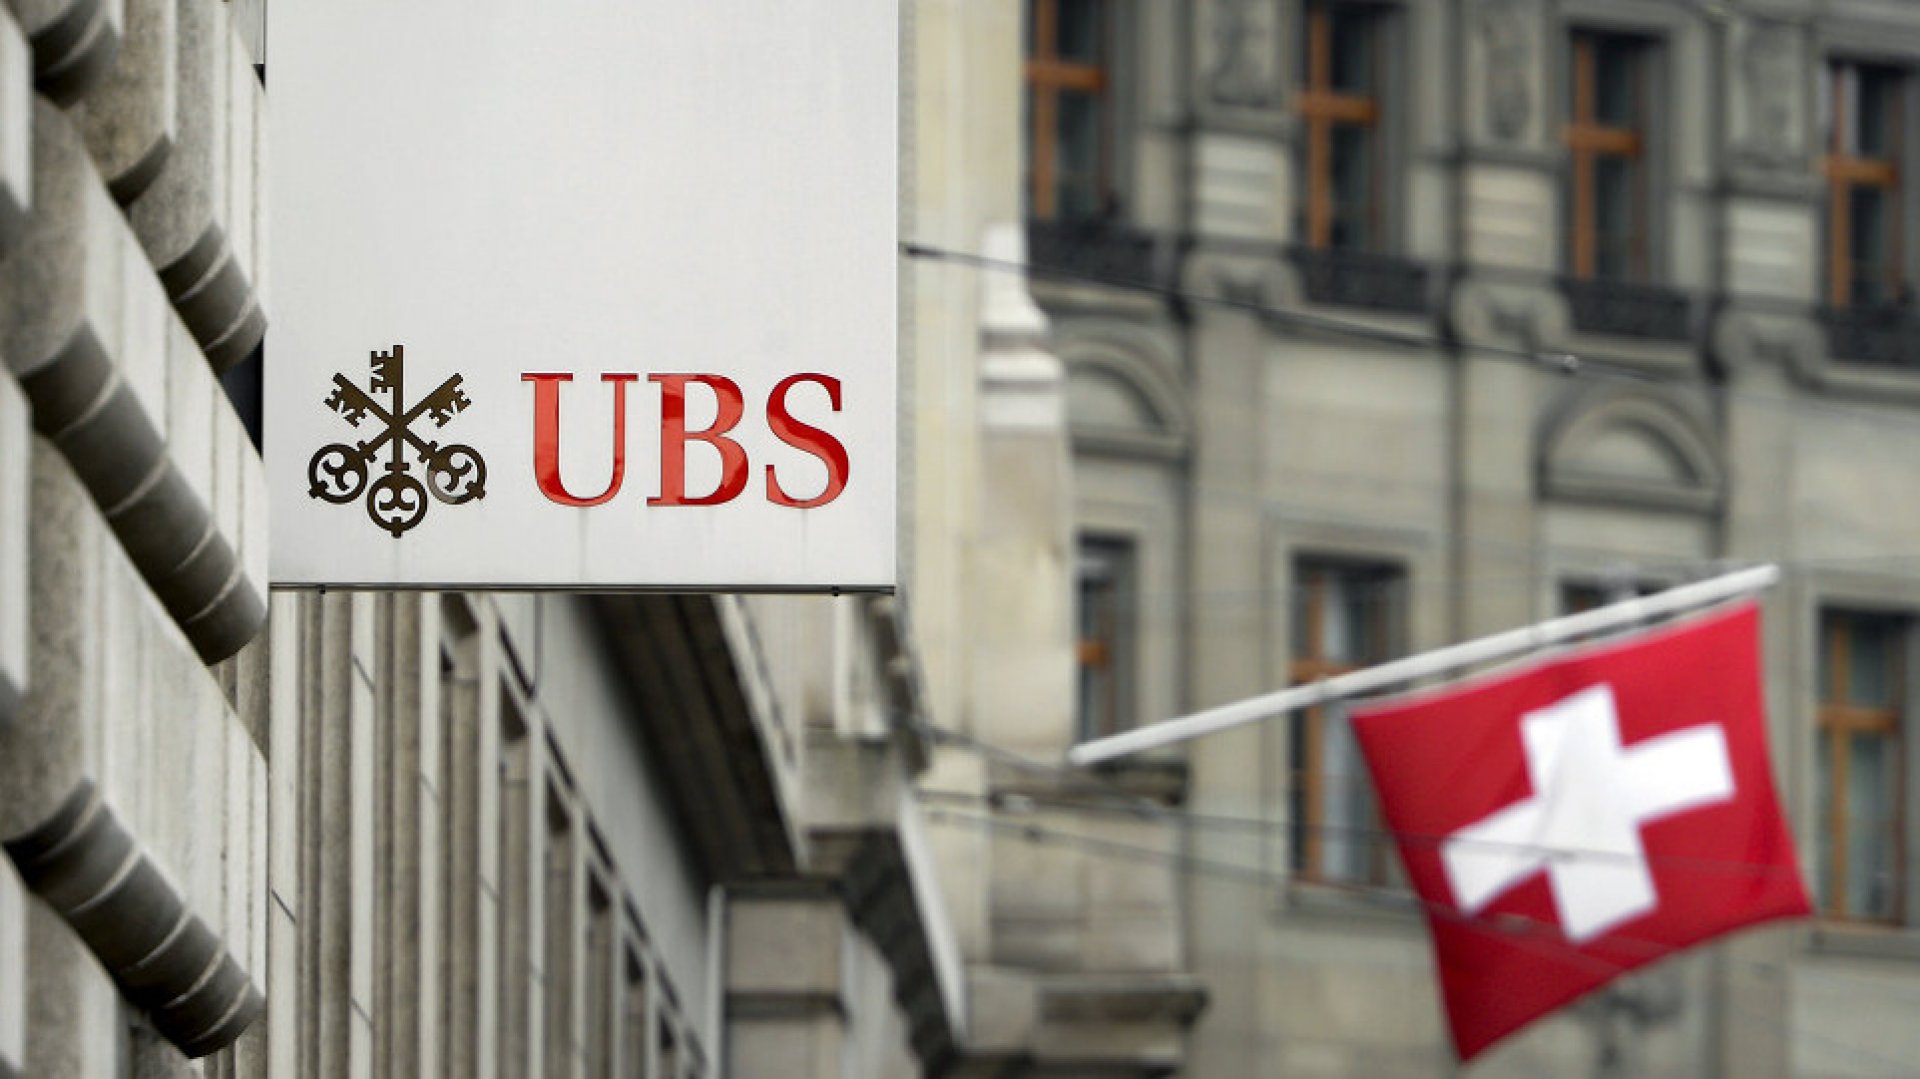 Another house that has been operating with the expectation of lower interest rates this year is UBS, expecting another SELIC cut to four percent.